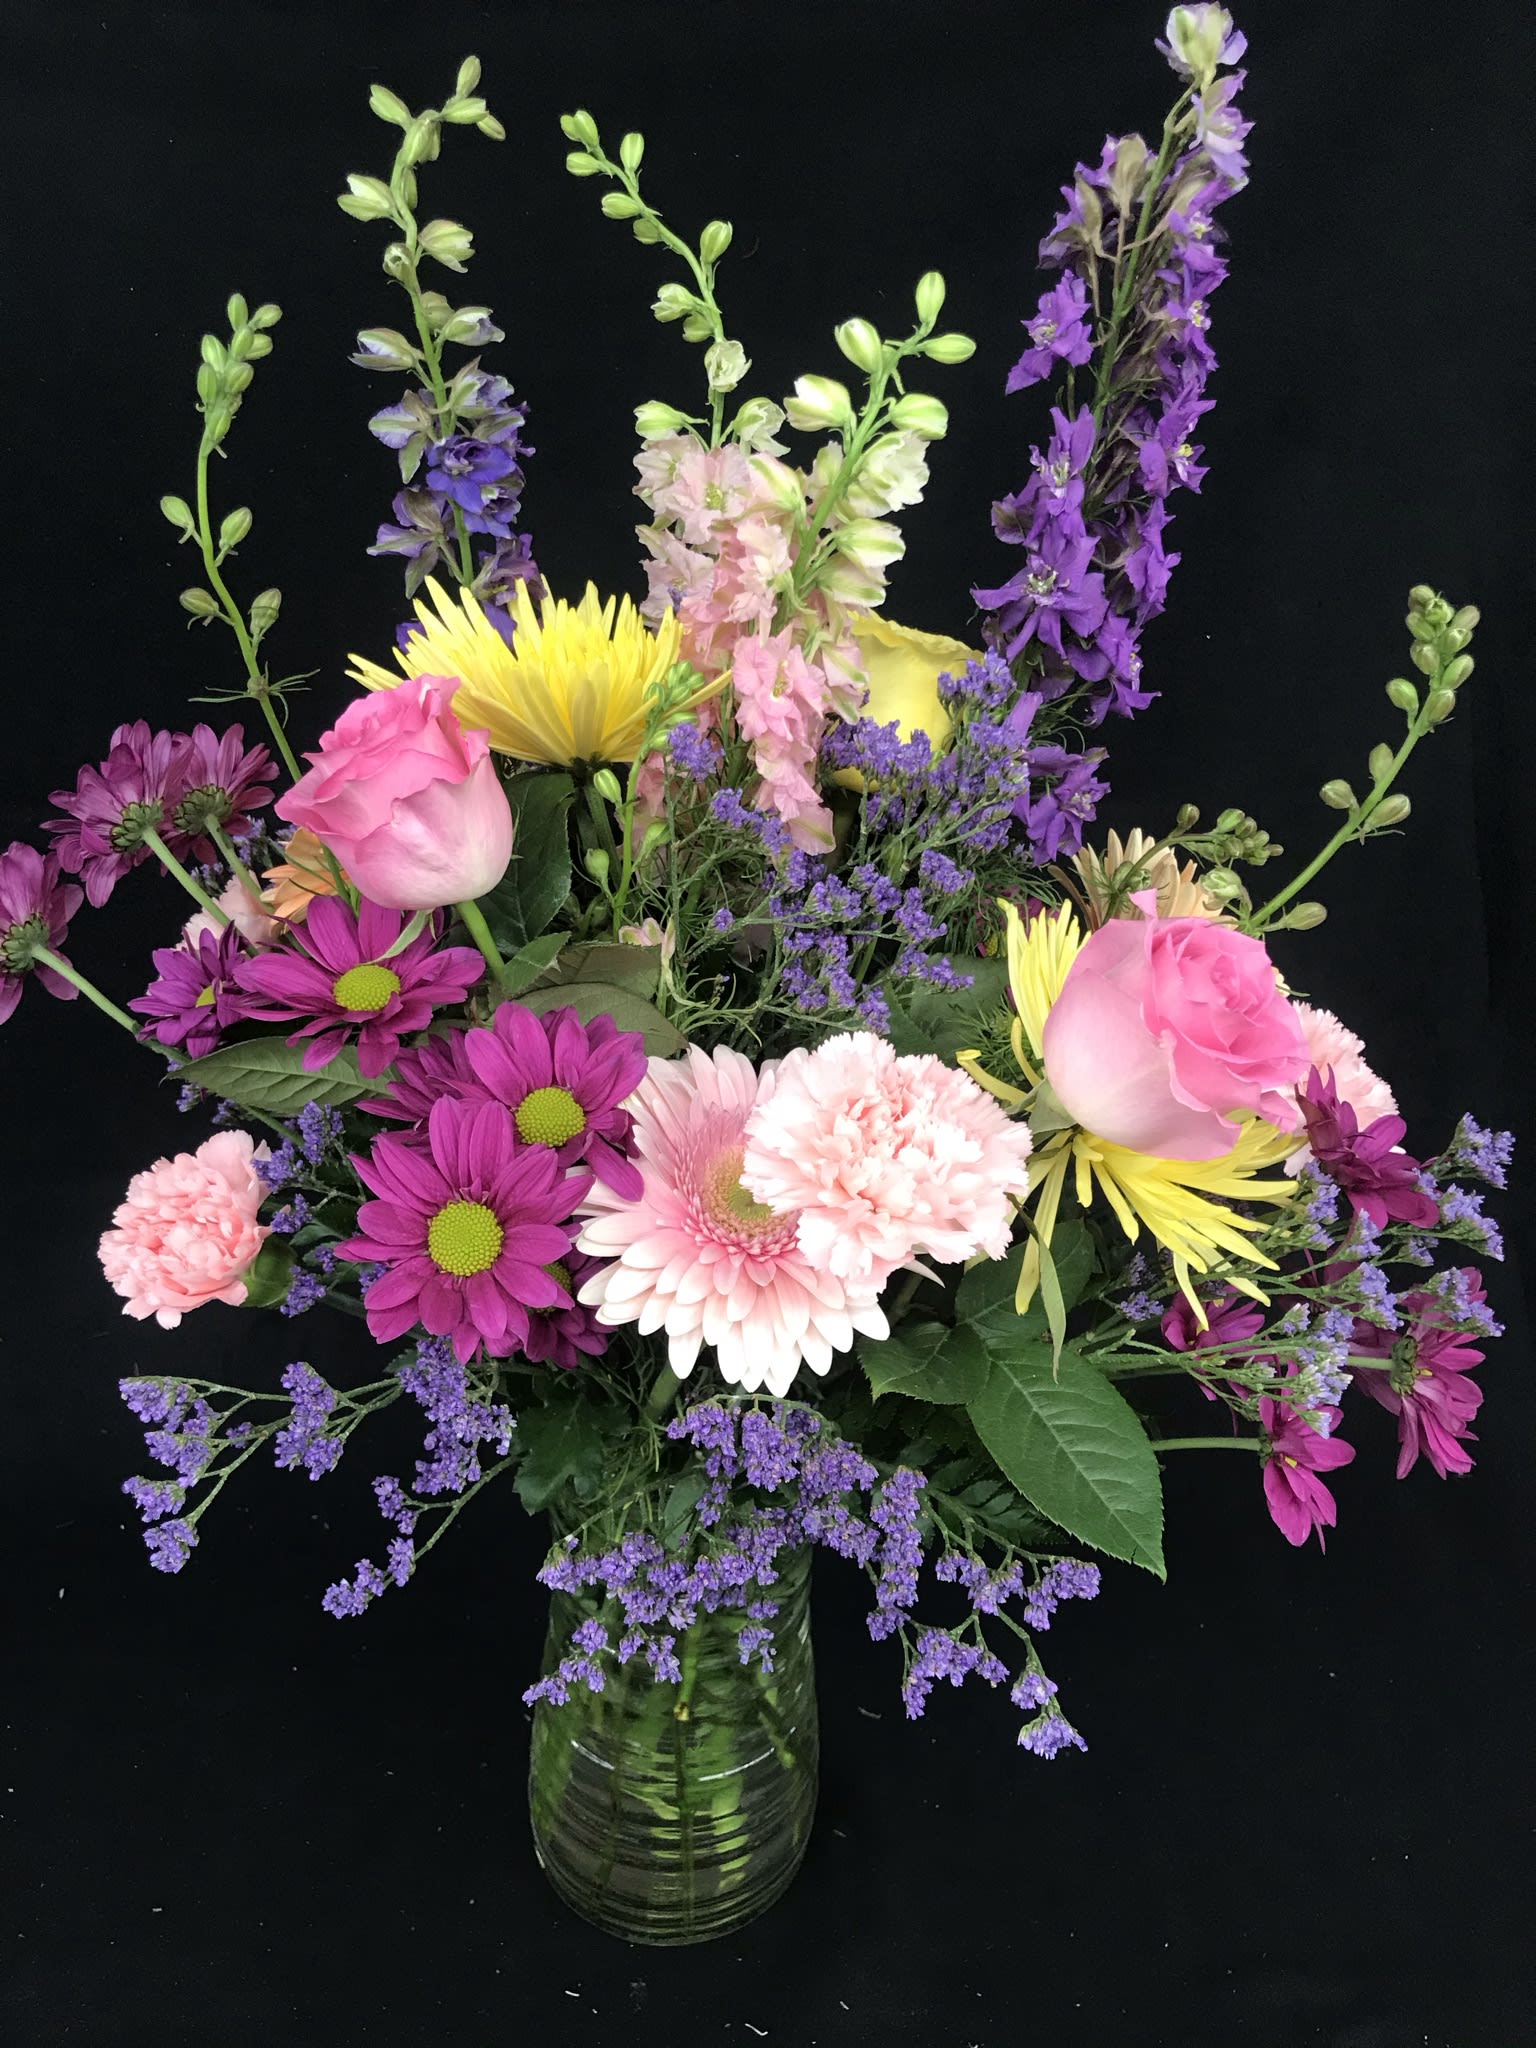  Romantic  Embrace Arrangement - This glass vase arrangement is filled with colorful assorted flowers 